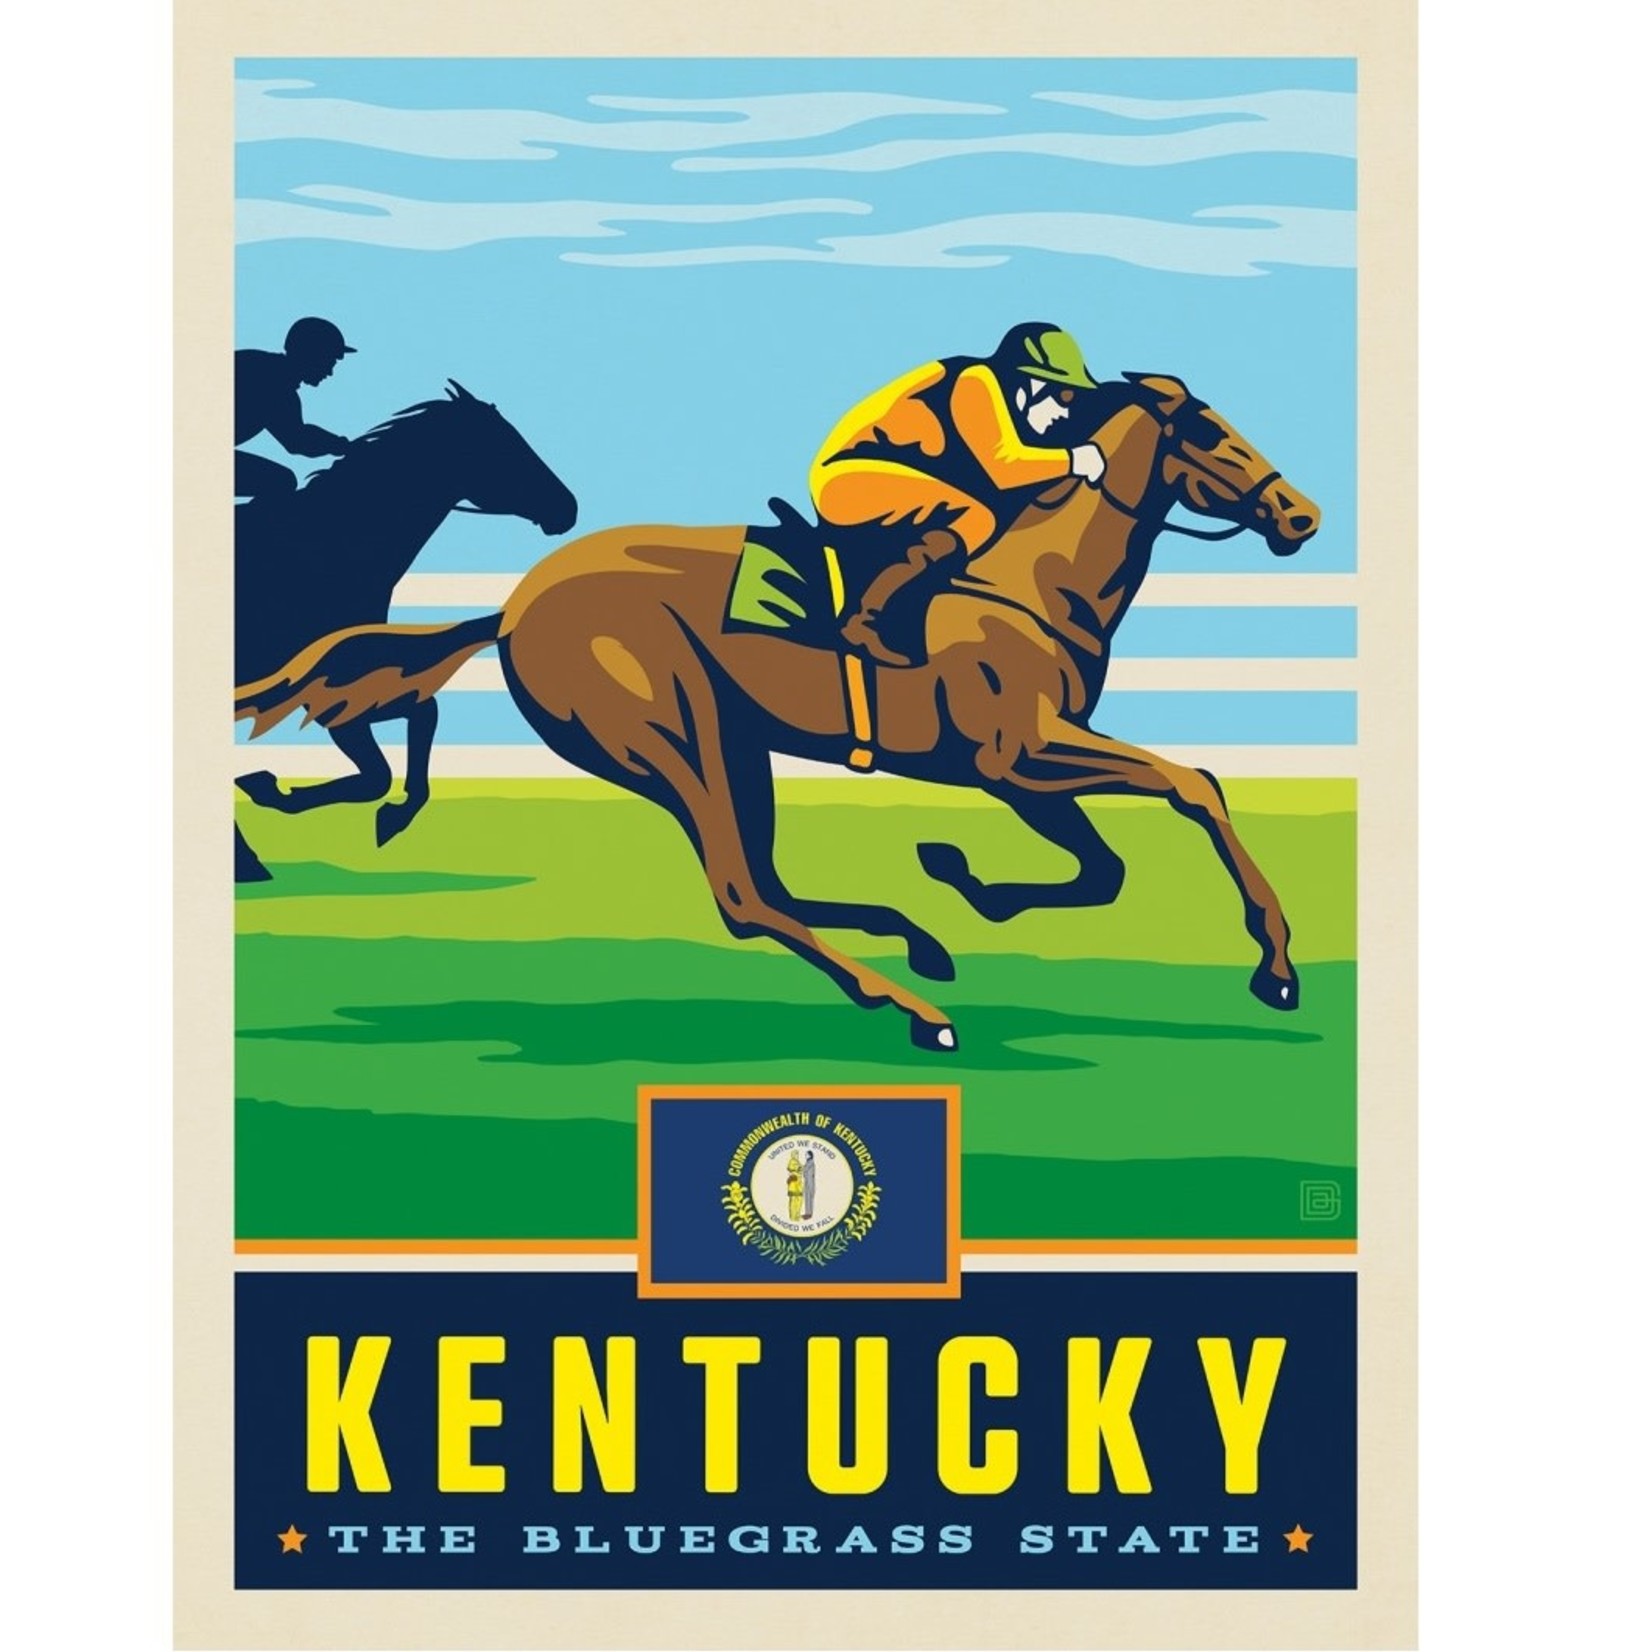 Posters Kentucky State Pride 11x14